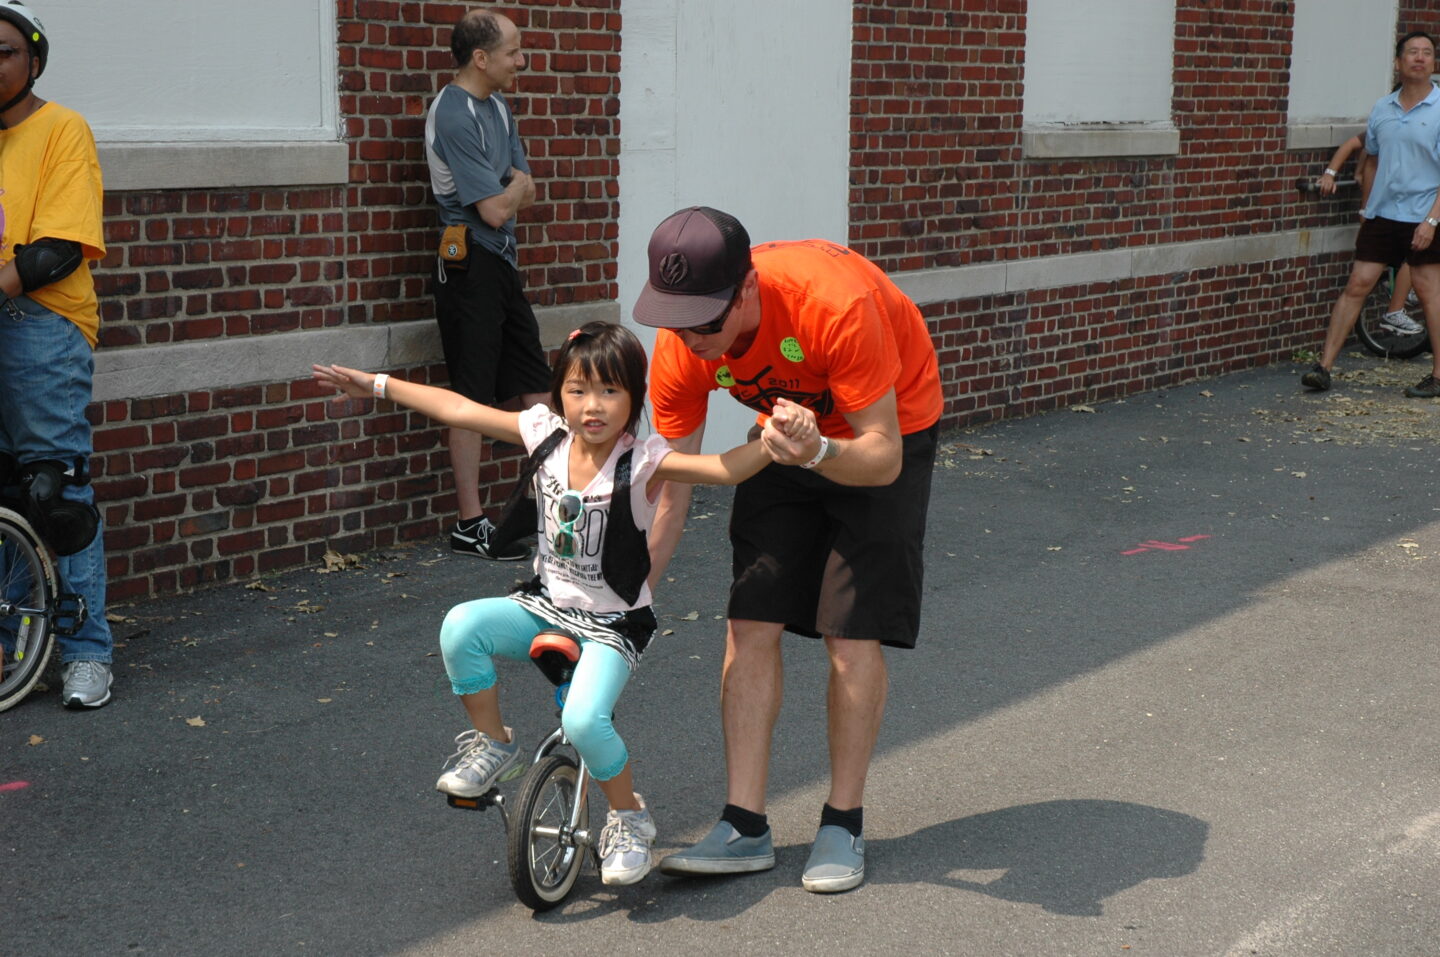 A parent guides a child riding a unicycle, holding their hand for balance